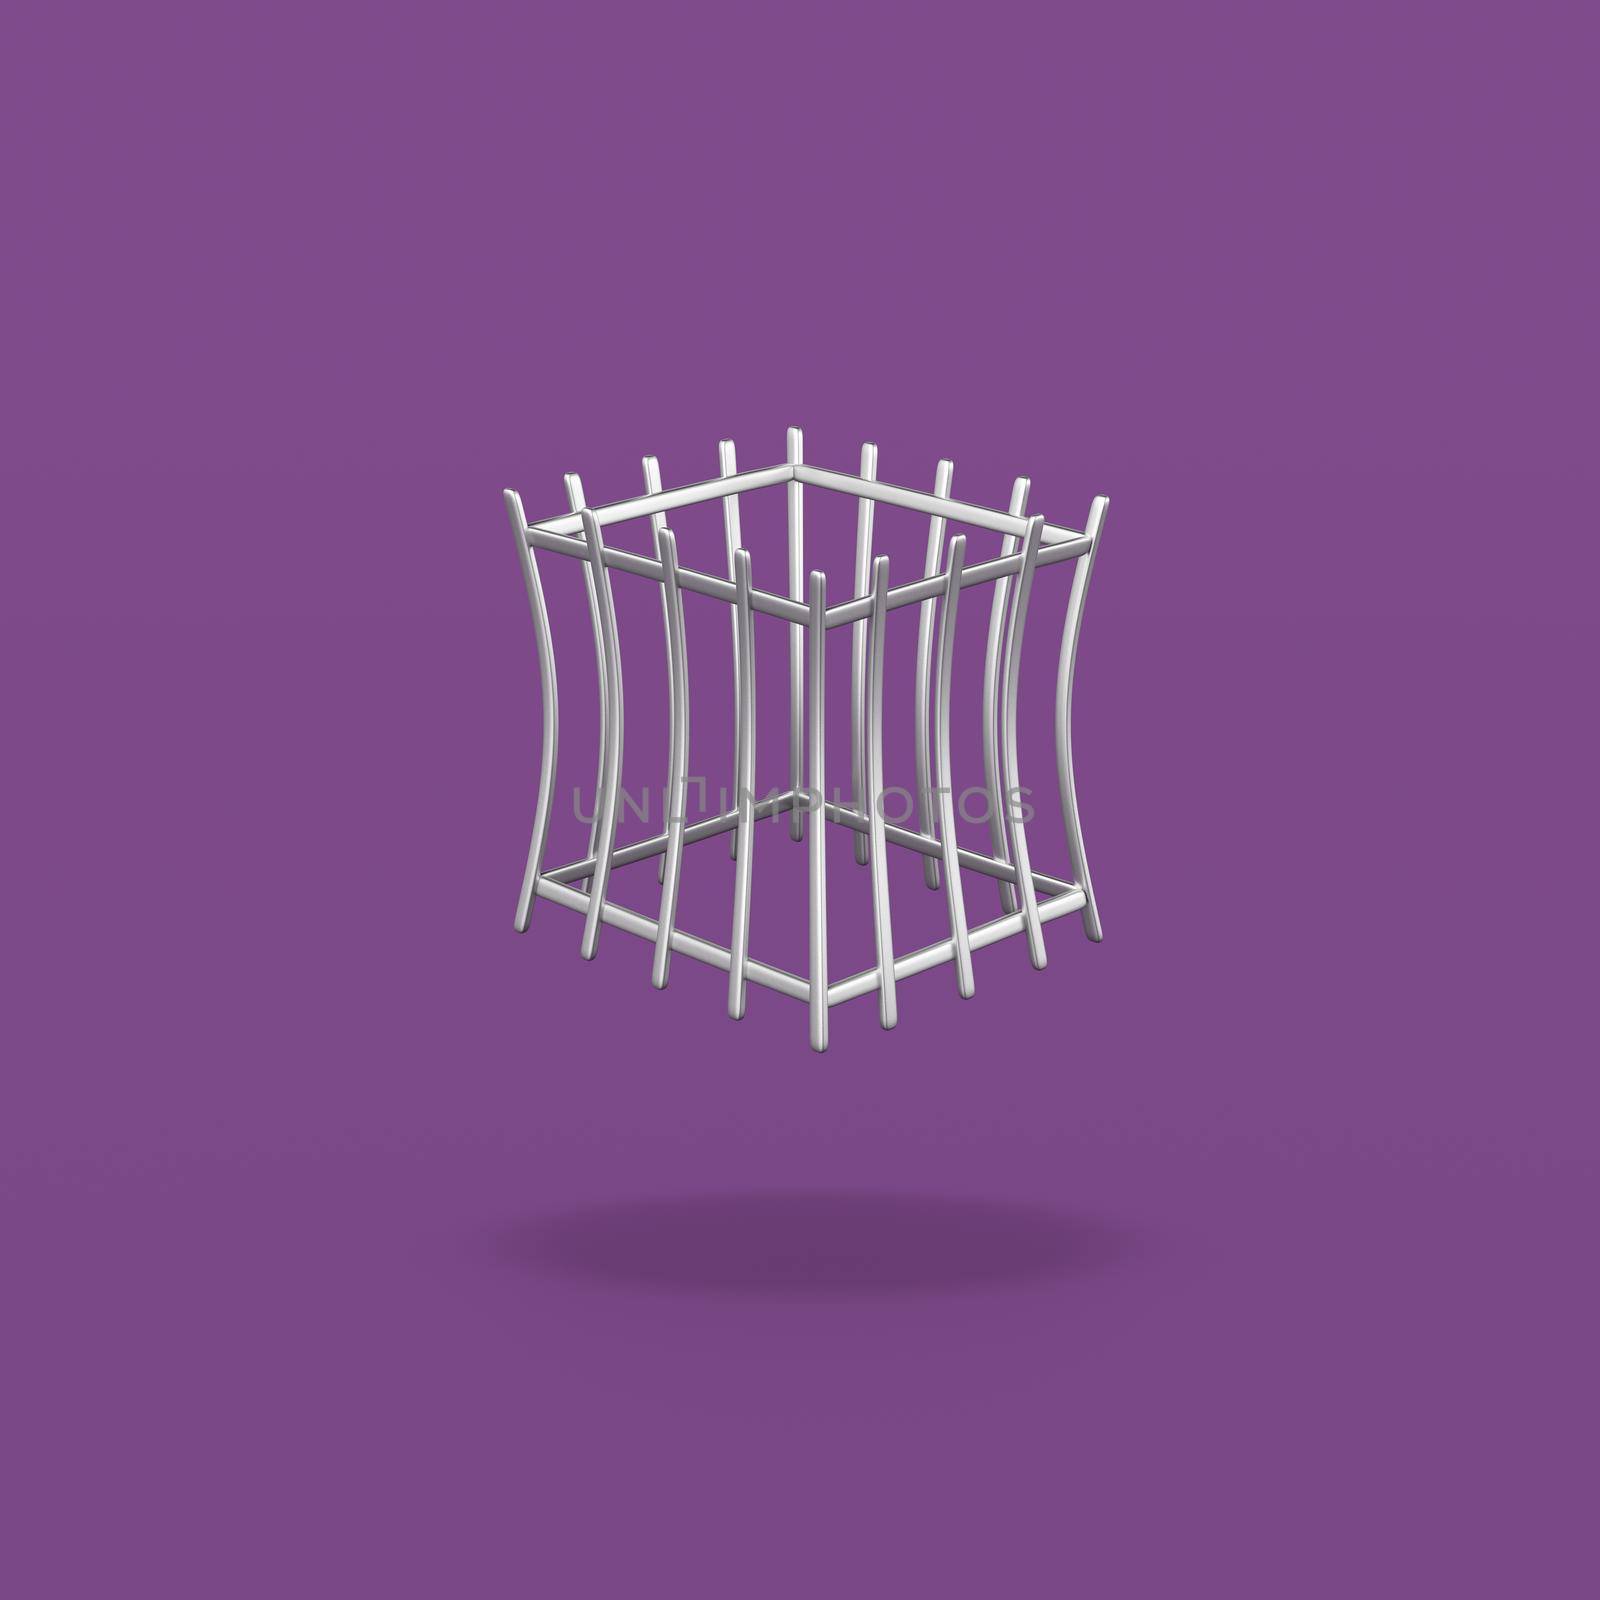 Empty Iron Cage on Purple Background by make